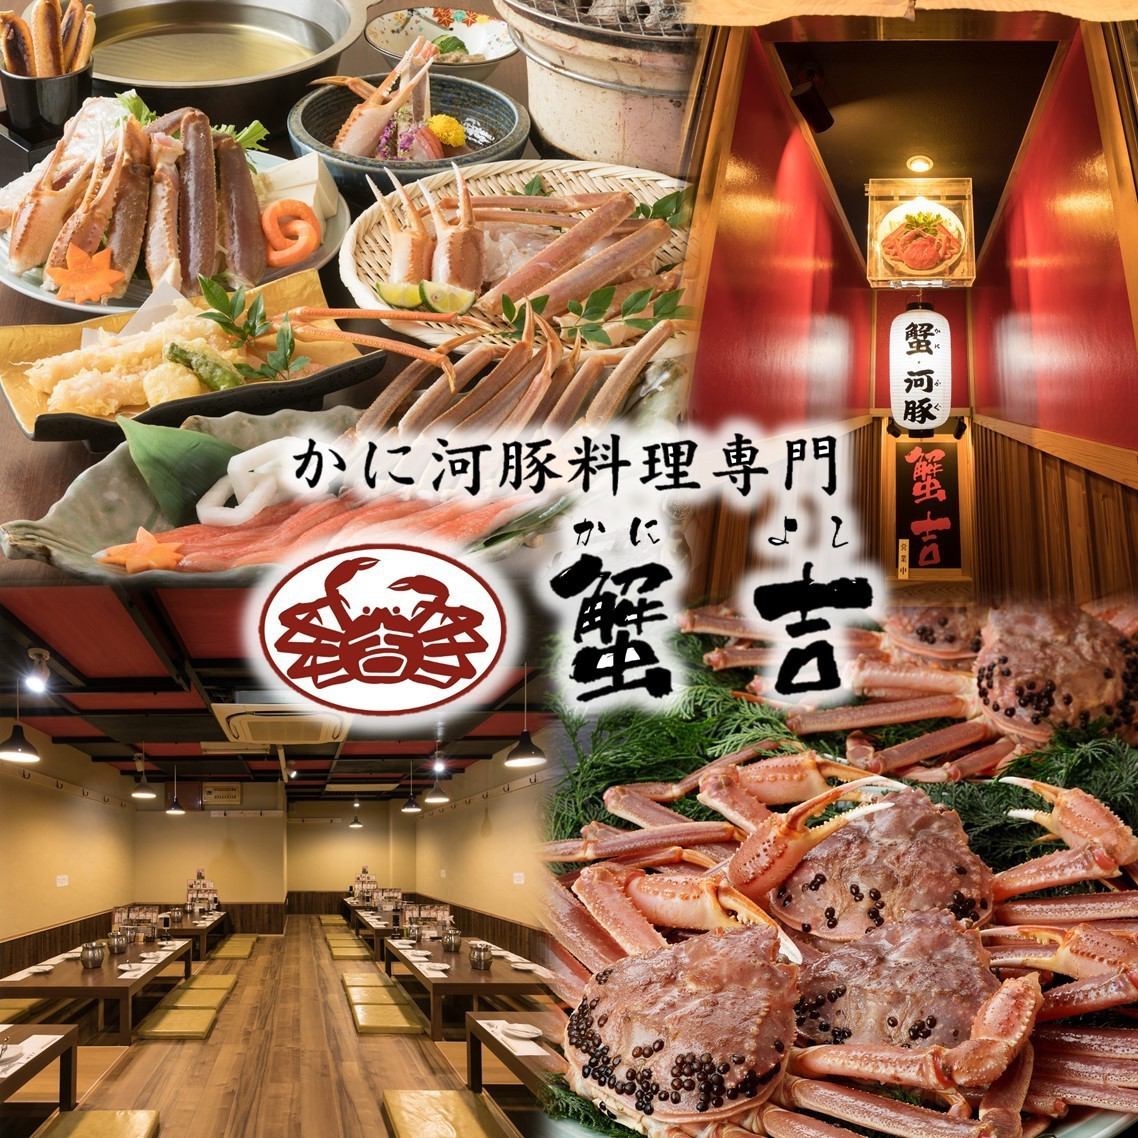 Great location, 1 minute walk from Namba Station! Spend a luxurious time at a crab and blowfish specialty restaurant in a private Japanese-style room...